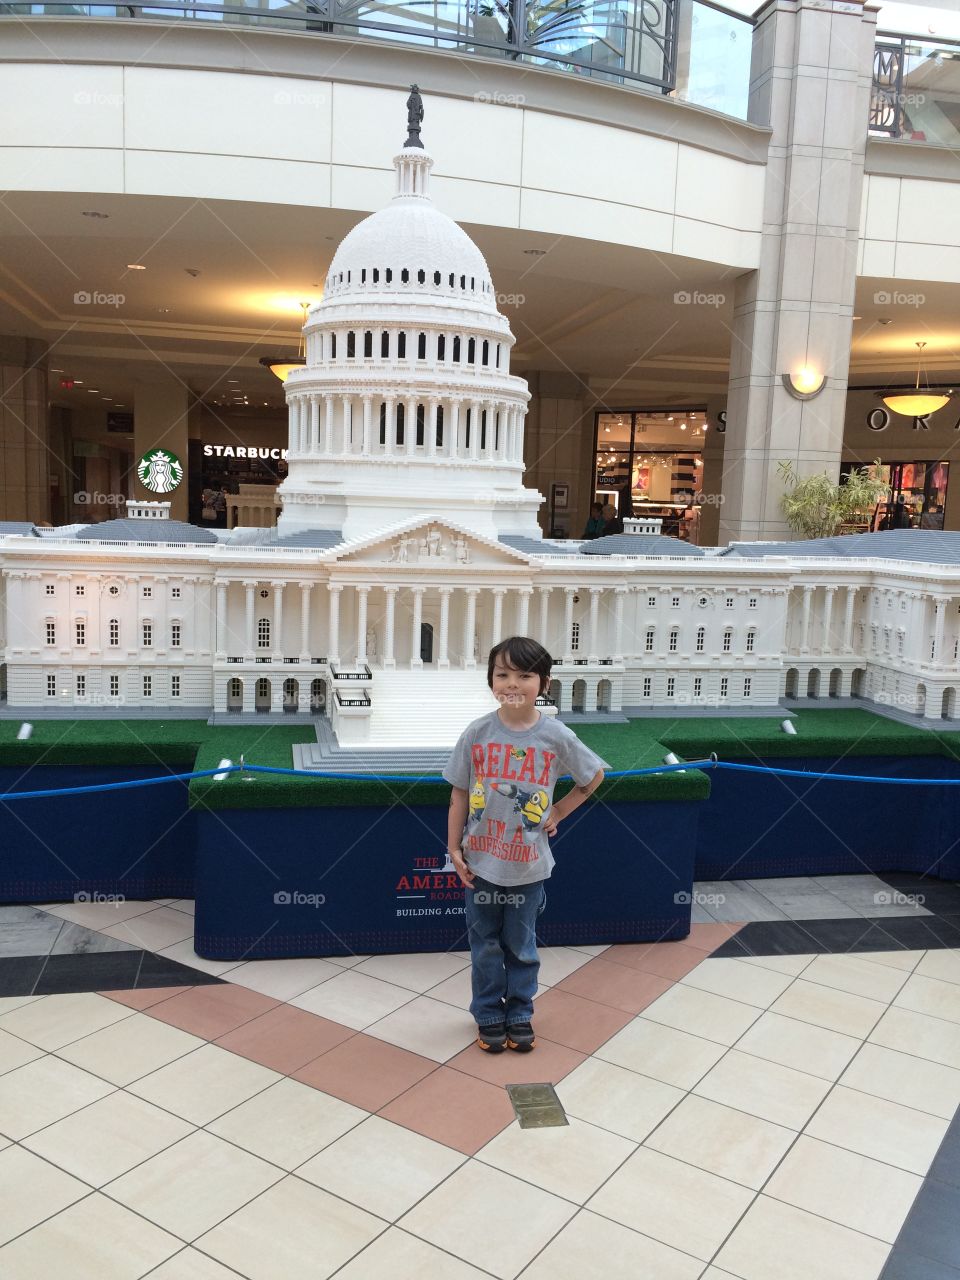 Lego capital building . Lego display at the mall